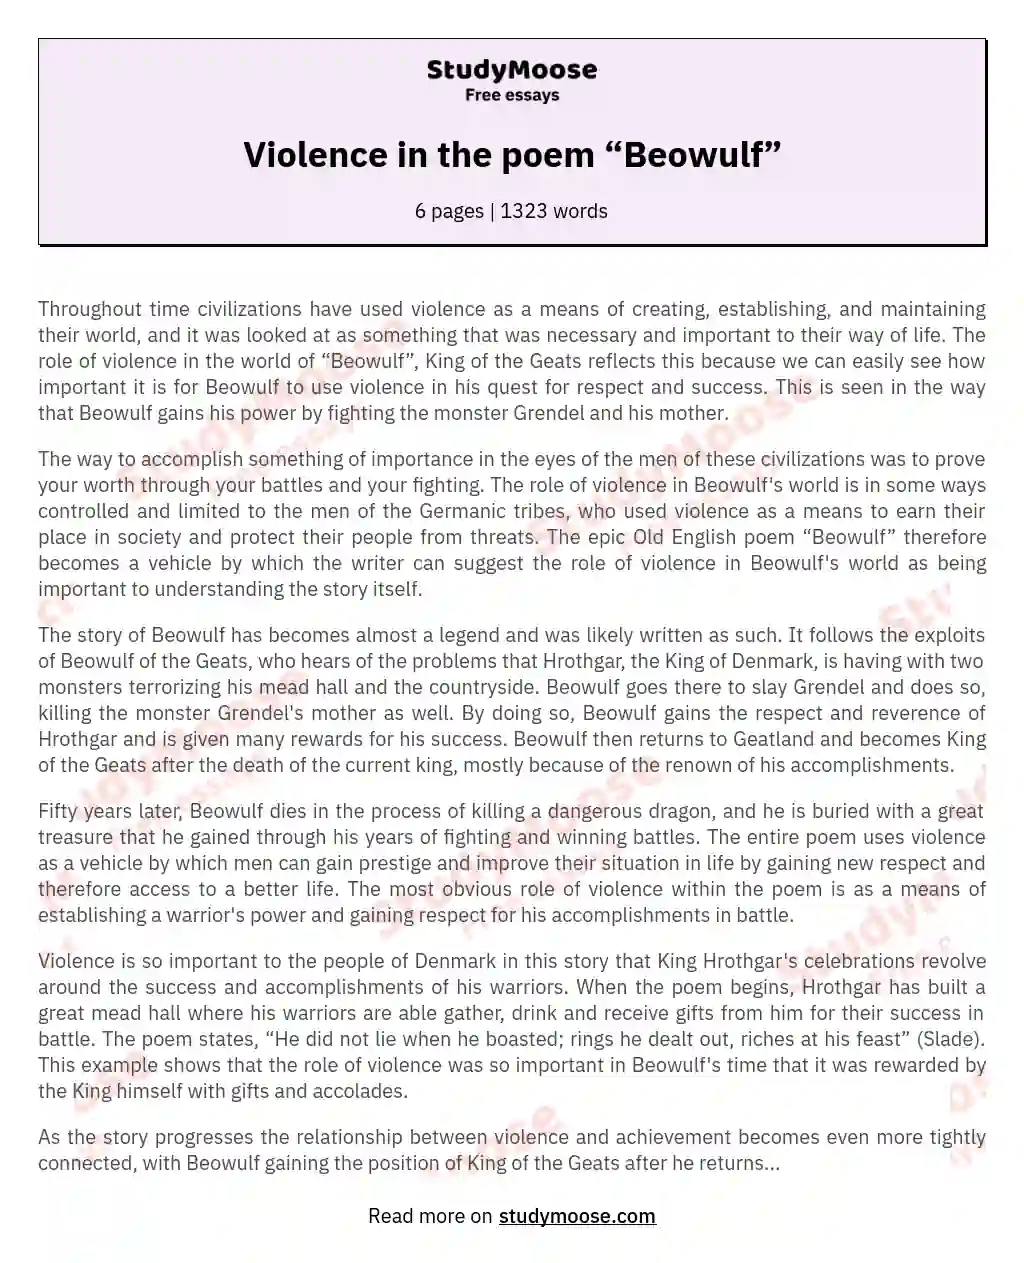 Violence in the poem “Beowulf” essay